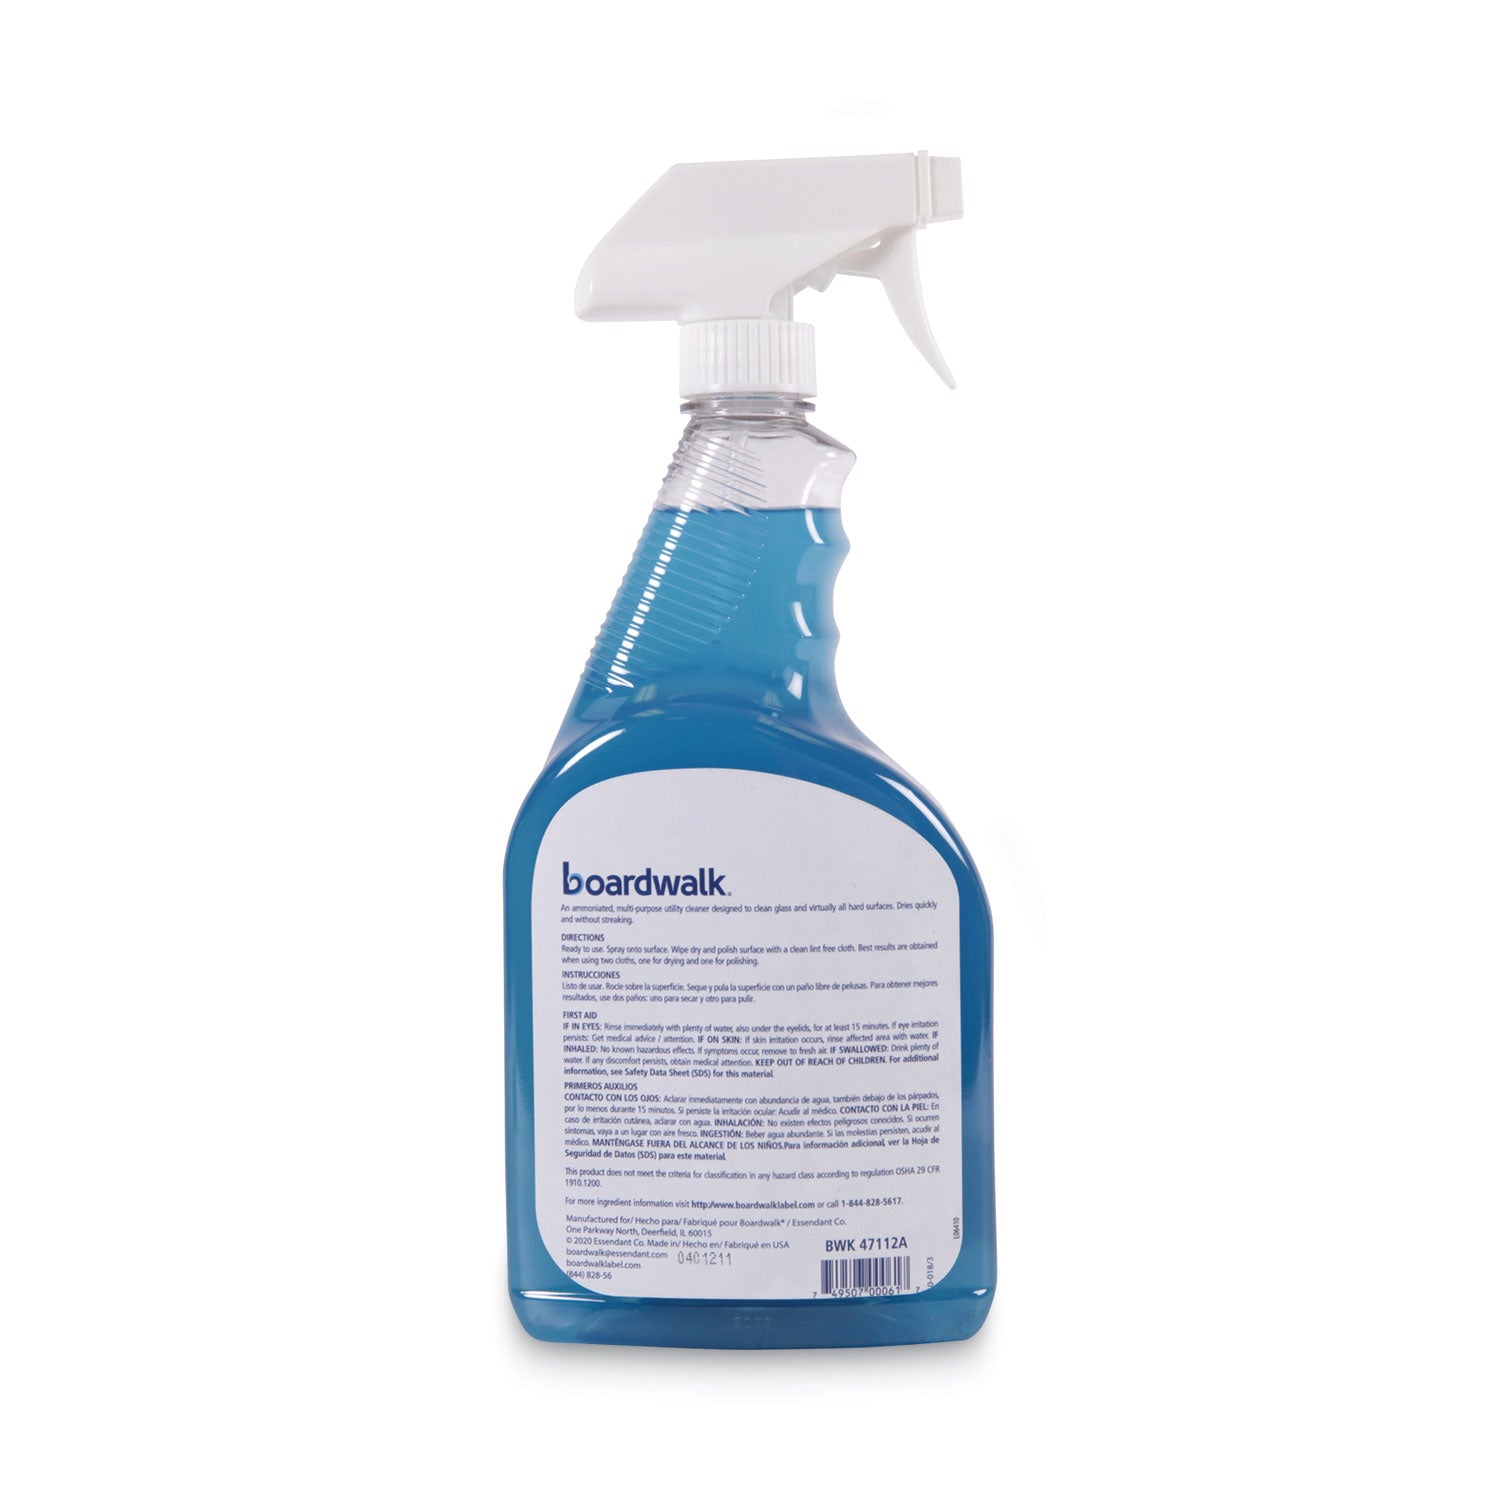 industrial-strength-glass-cleaner-with-ammonia-32-oz-trigger-spray-bottle_bwk47112aea - 3